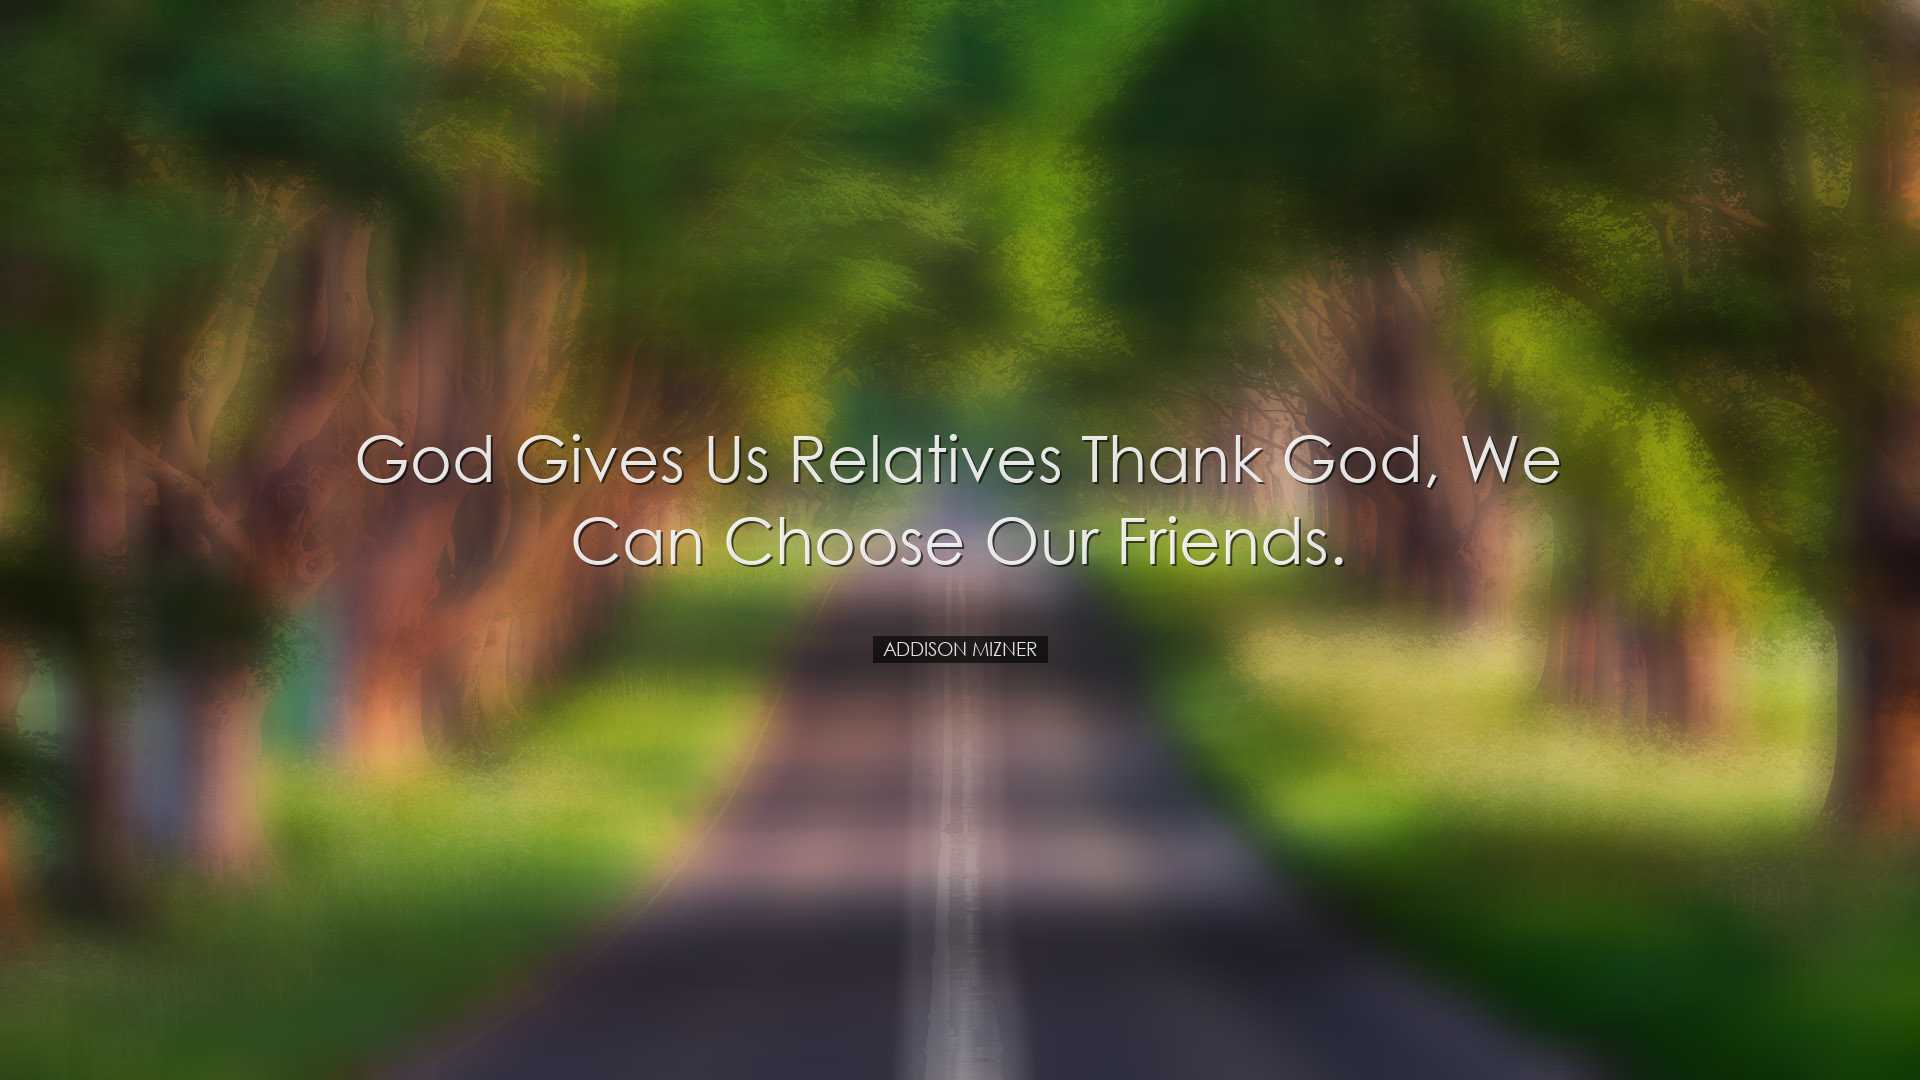 God gives us relatives thank God, we can choose our friends. - Add